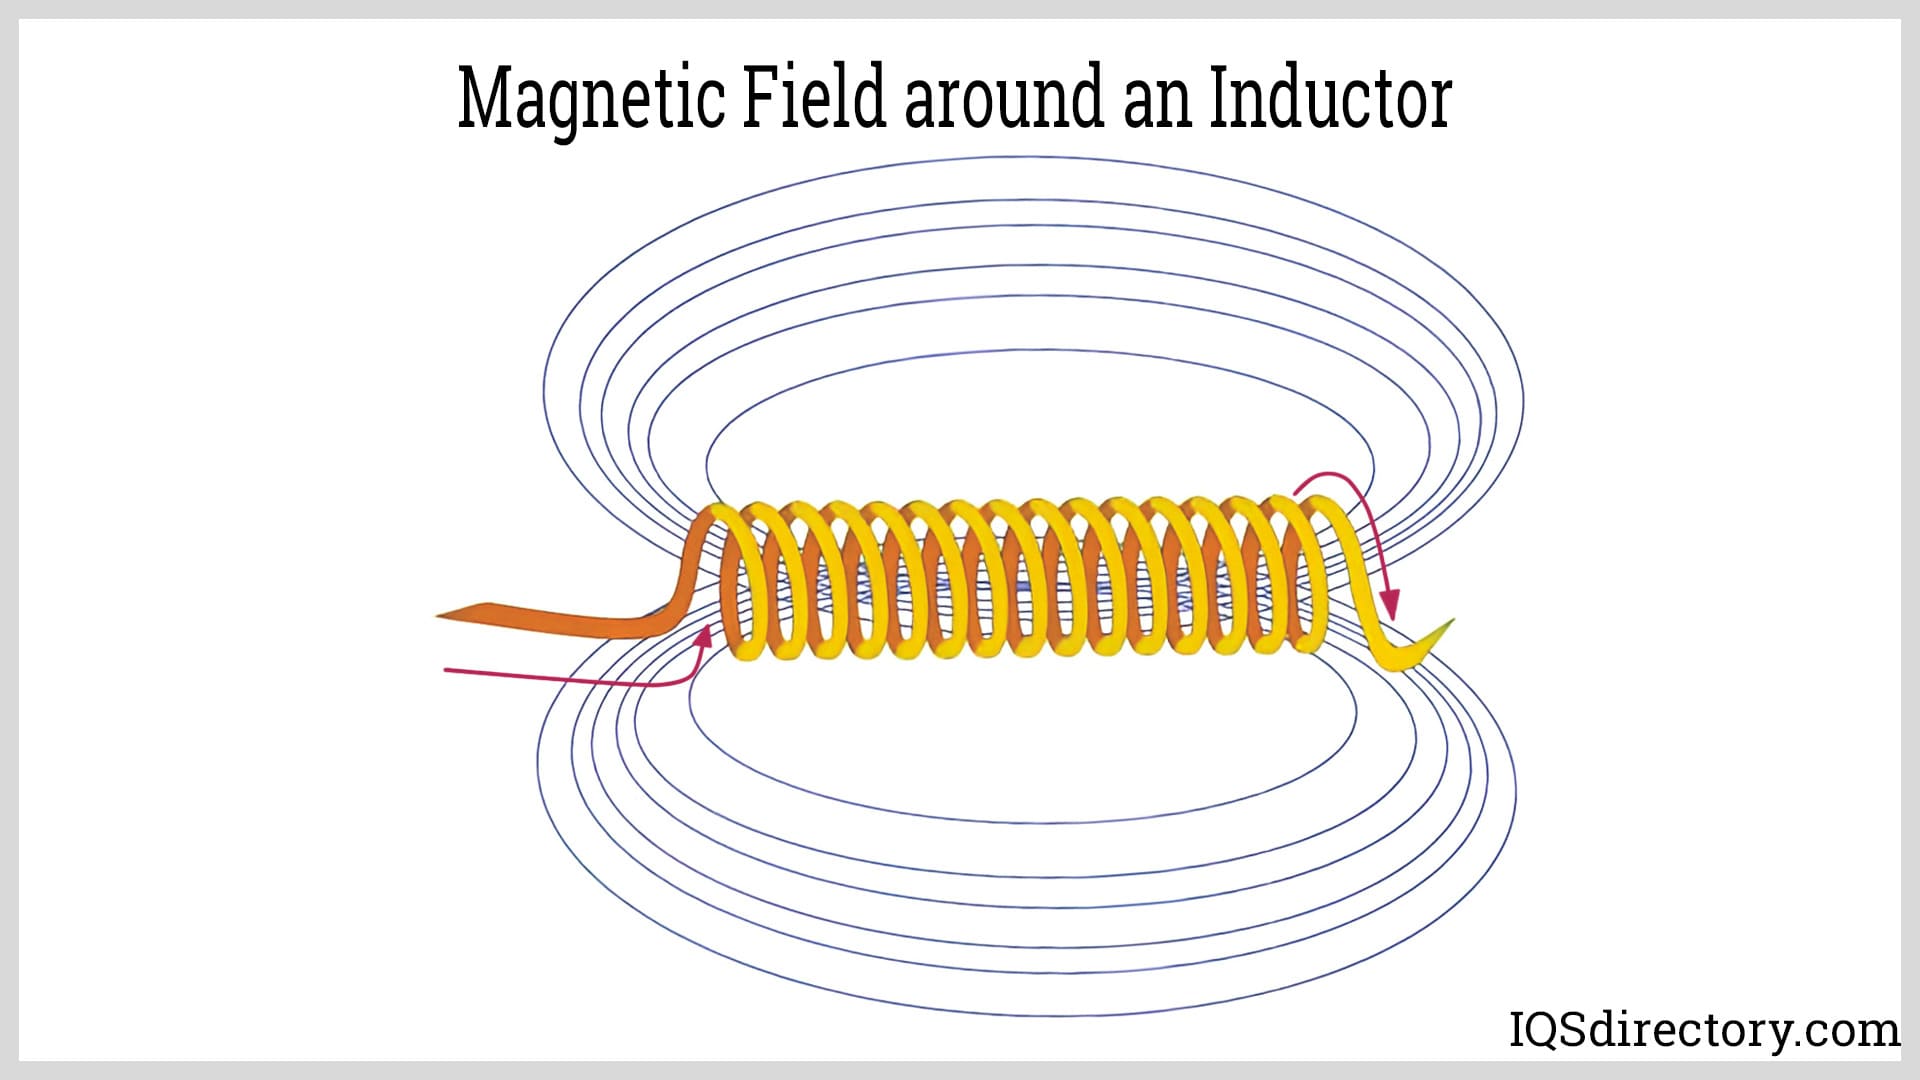 Magnetic Field Around an Inductor